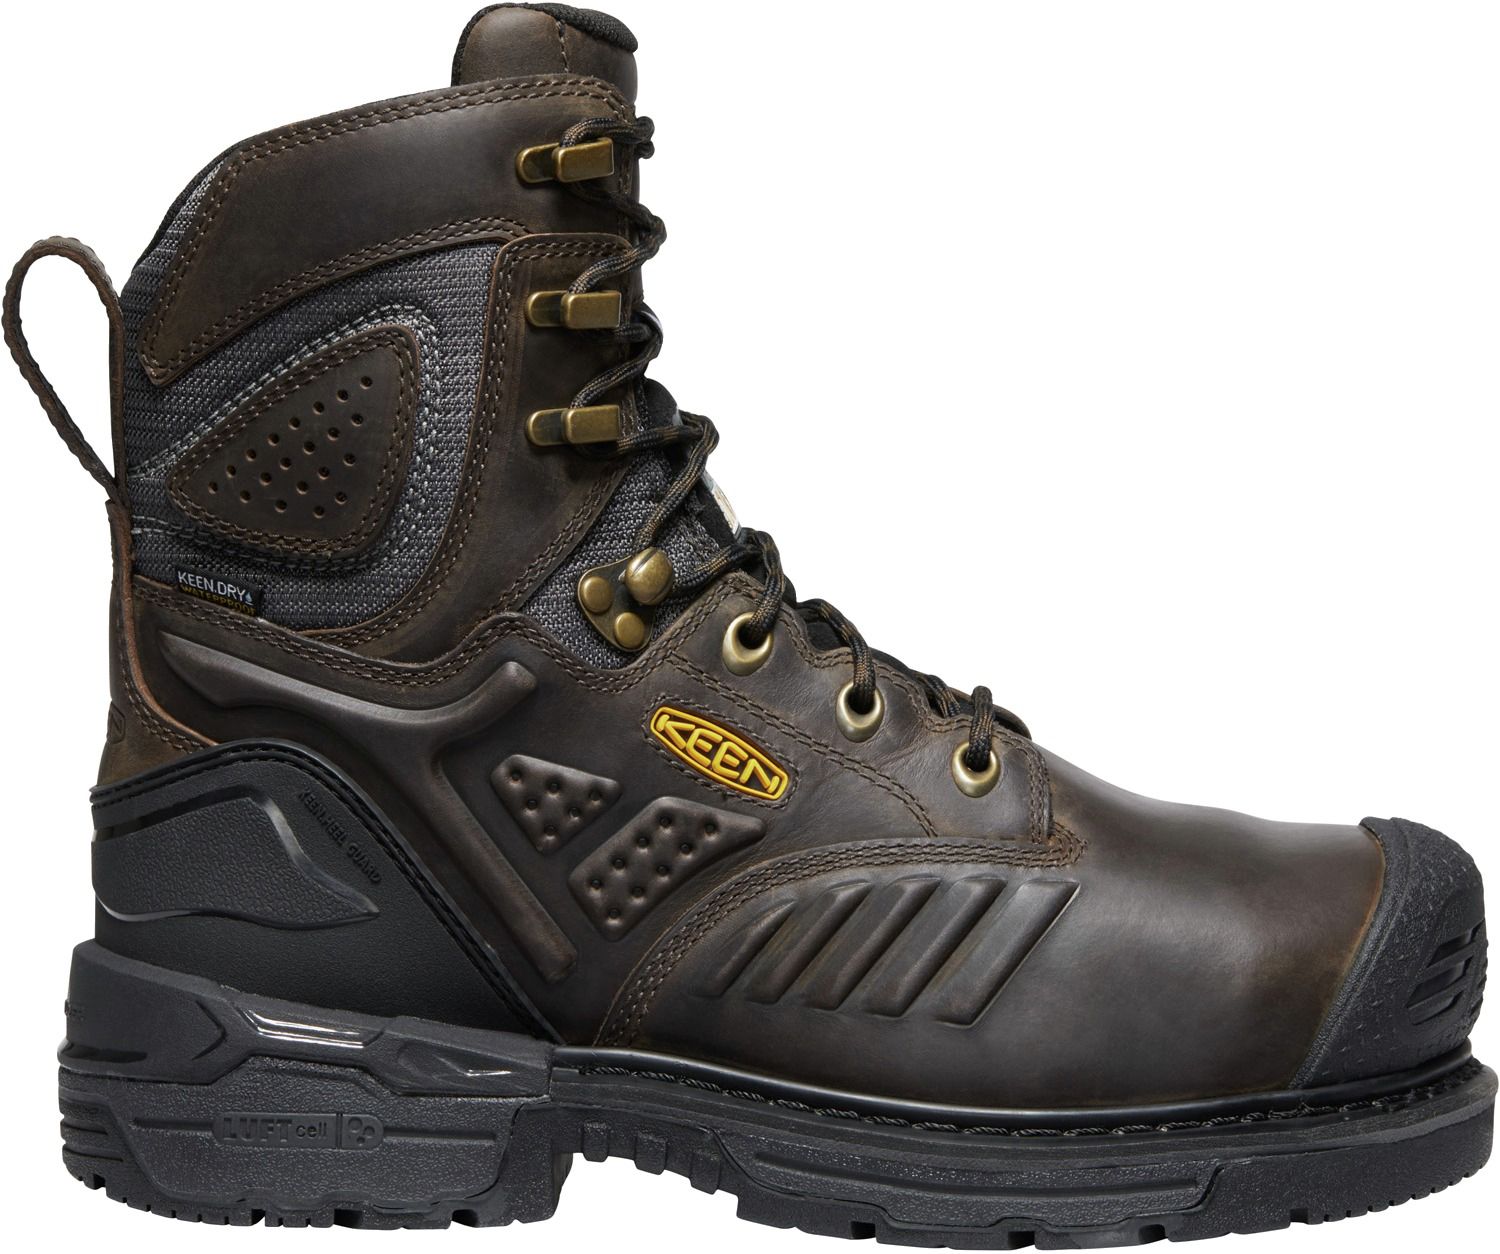 composite toe hiking work boots